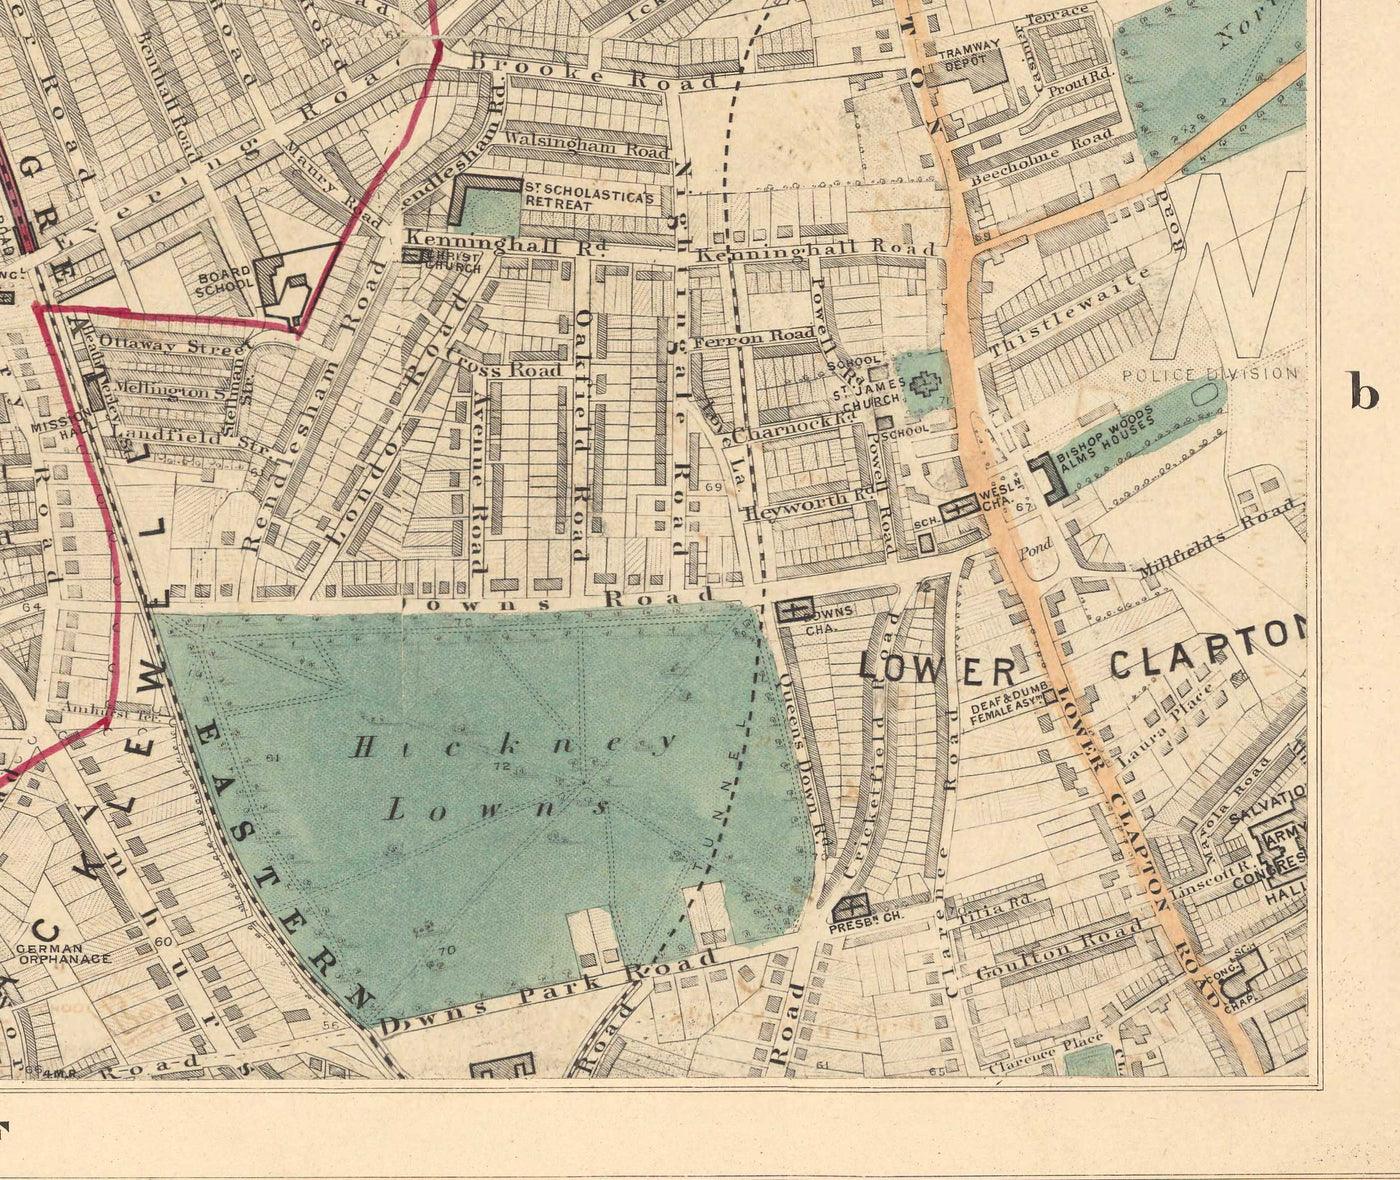 Old Colour Map of North London, 1891 - Finsbury Park, Hackney Downs, Stoke Newington, Clapton - N4, N5, N15, N16, E5